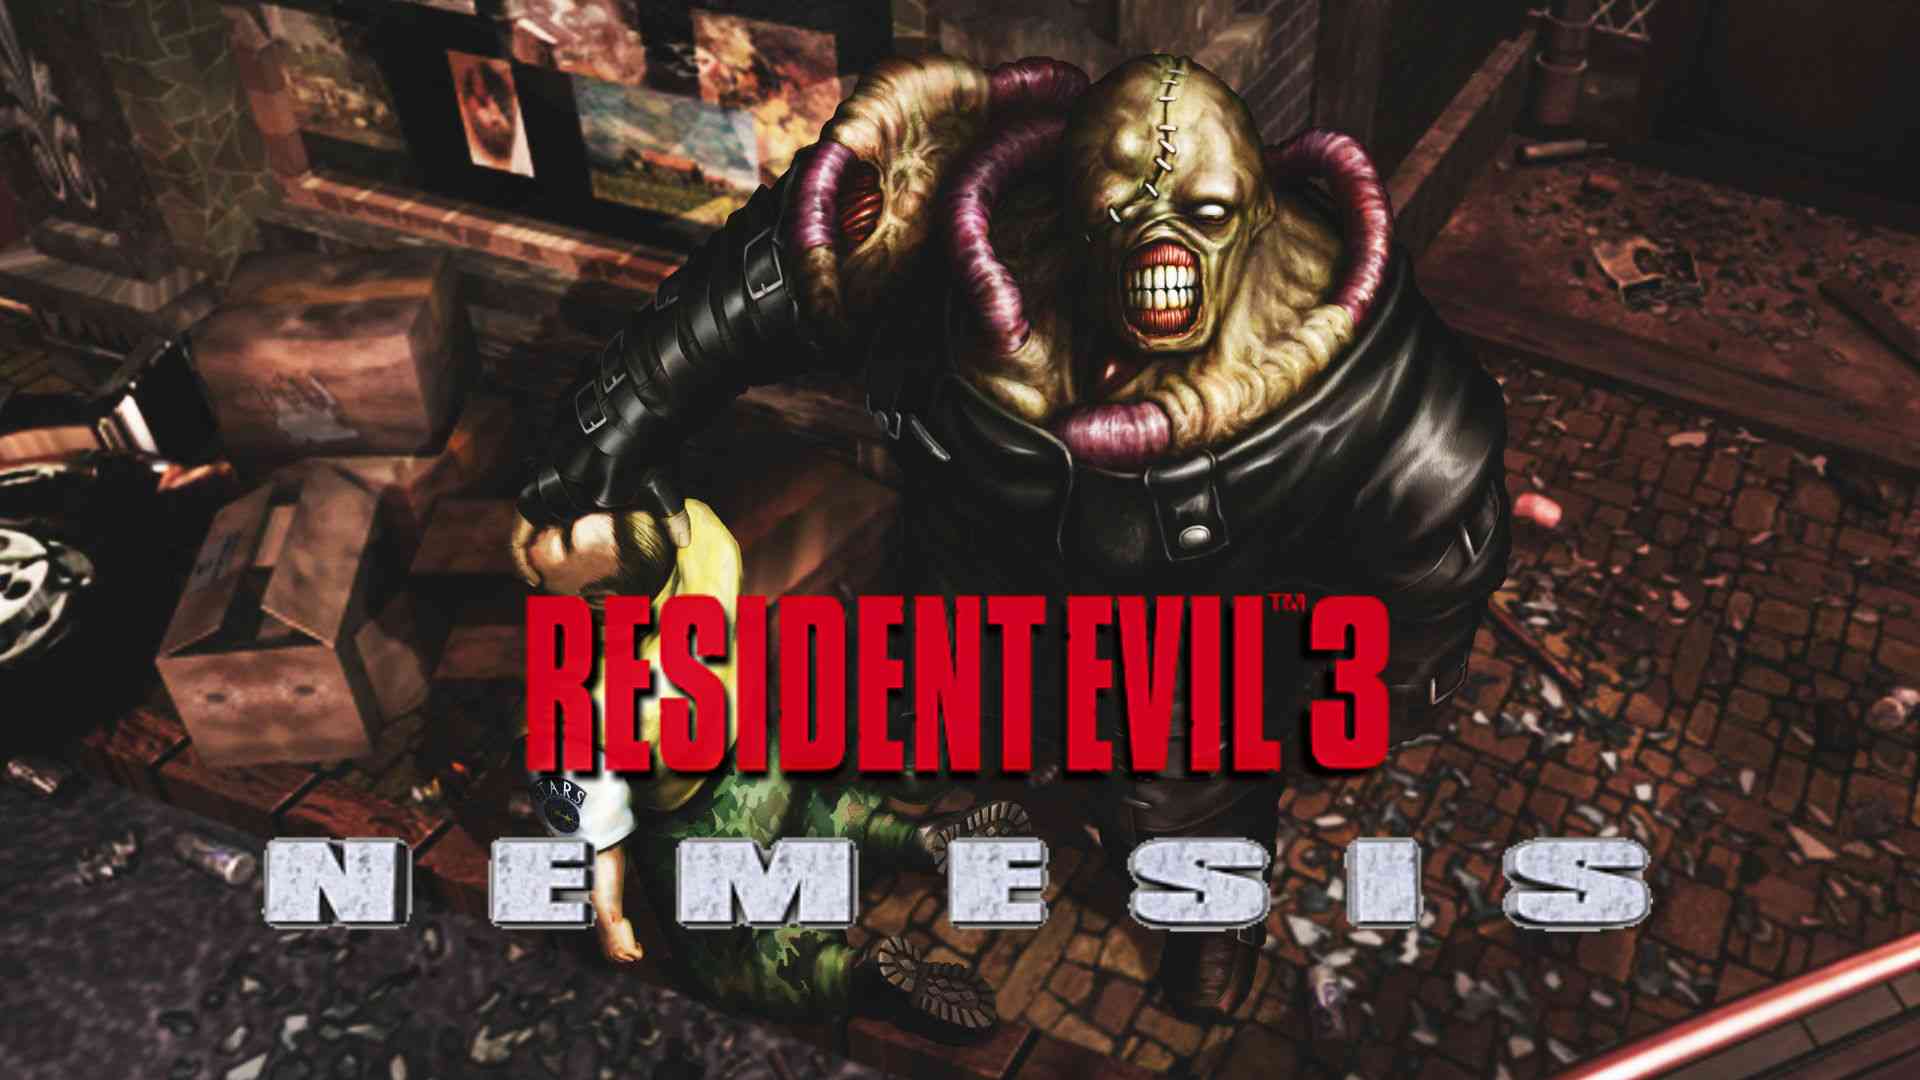 capcom is initiating tests on new resident evil title 2903 big 1